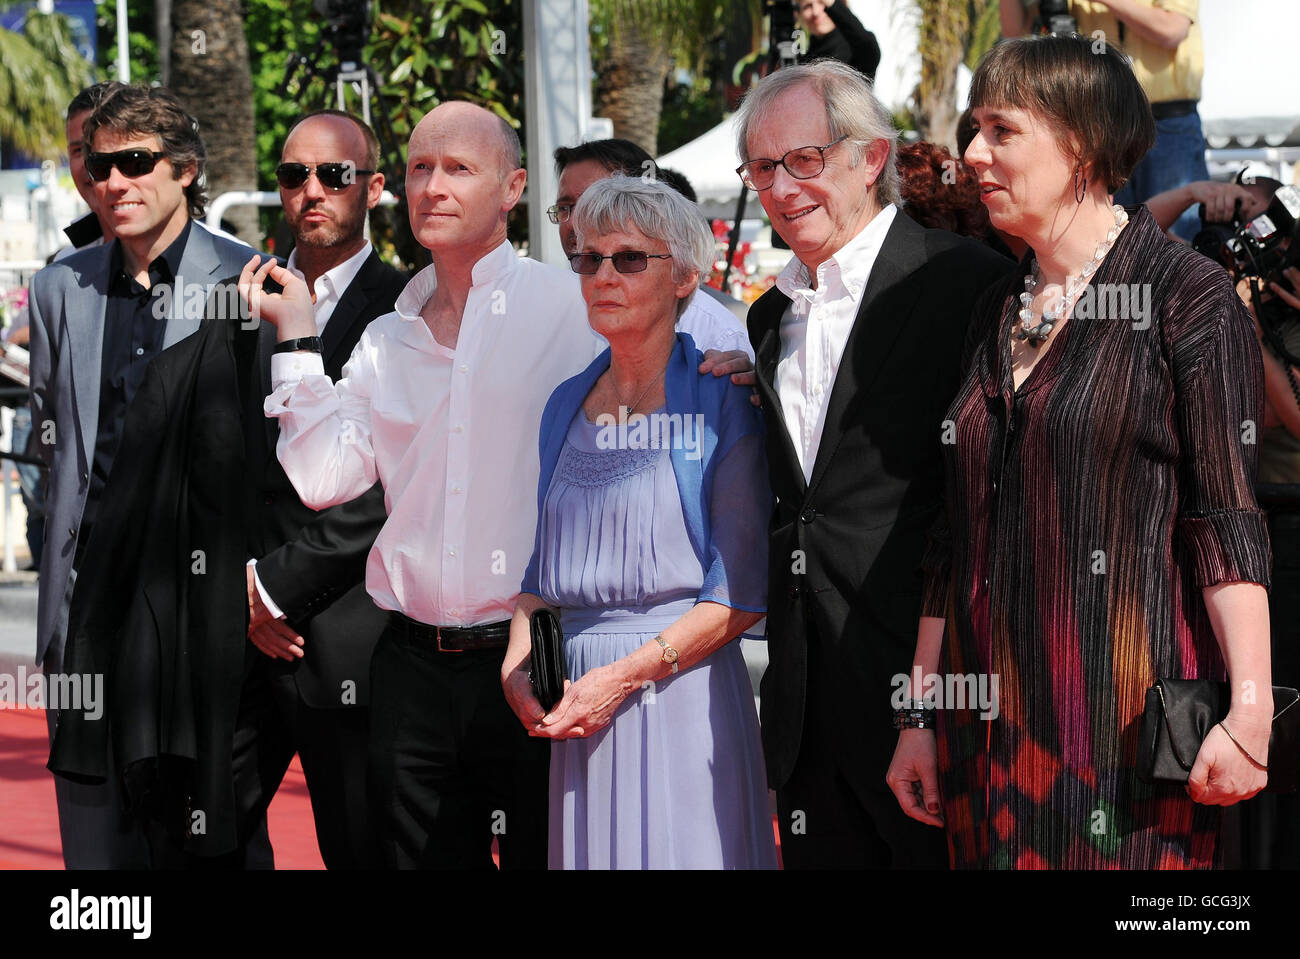 (left to right) Actor John Bishop, actor Mark Womack, screenwriter Paul Laverty, wife of the director Lesley Ashton, director Ken Loach and producer Rebecca O'Brien attend the premiere of Route Irish, during the 63rd Cannes Film Festival, France. The film is a late entry for the Palme D'Or. Stock Photo